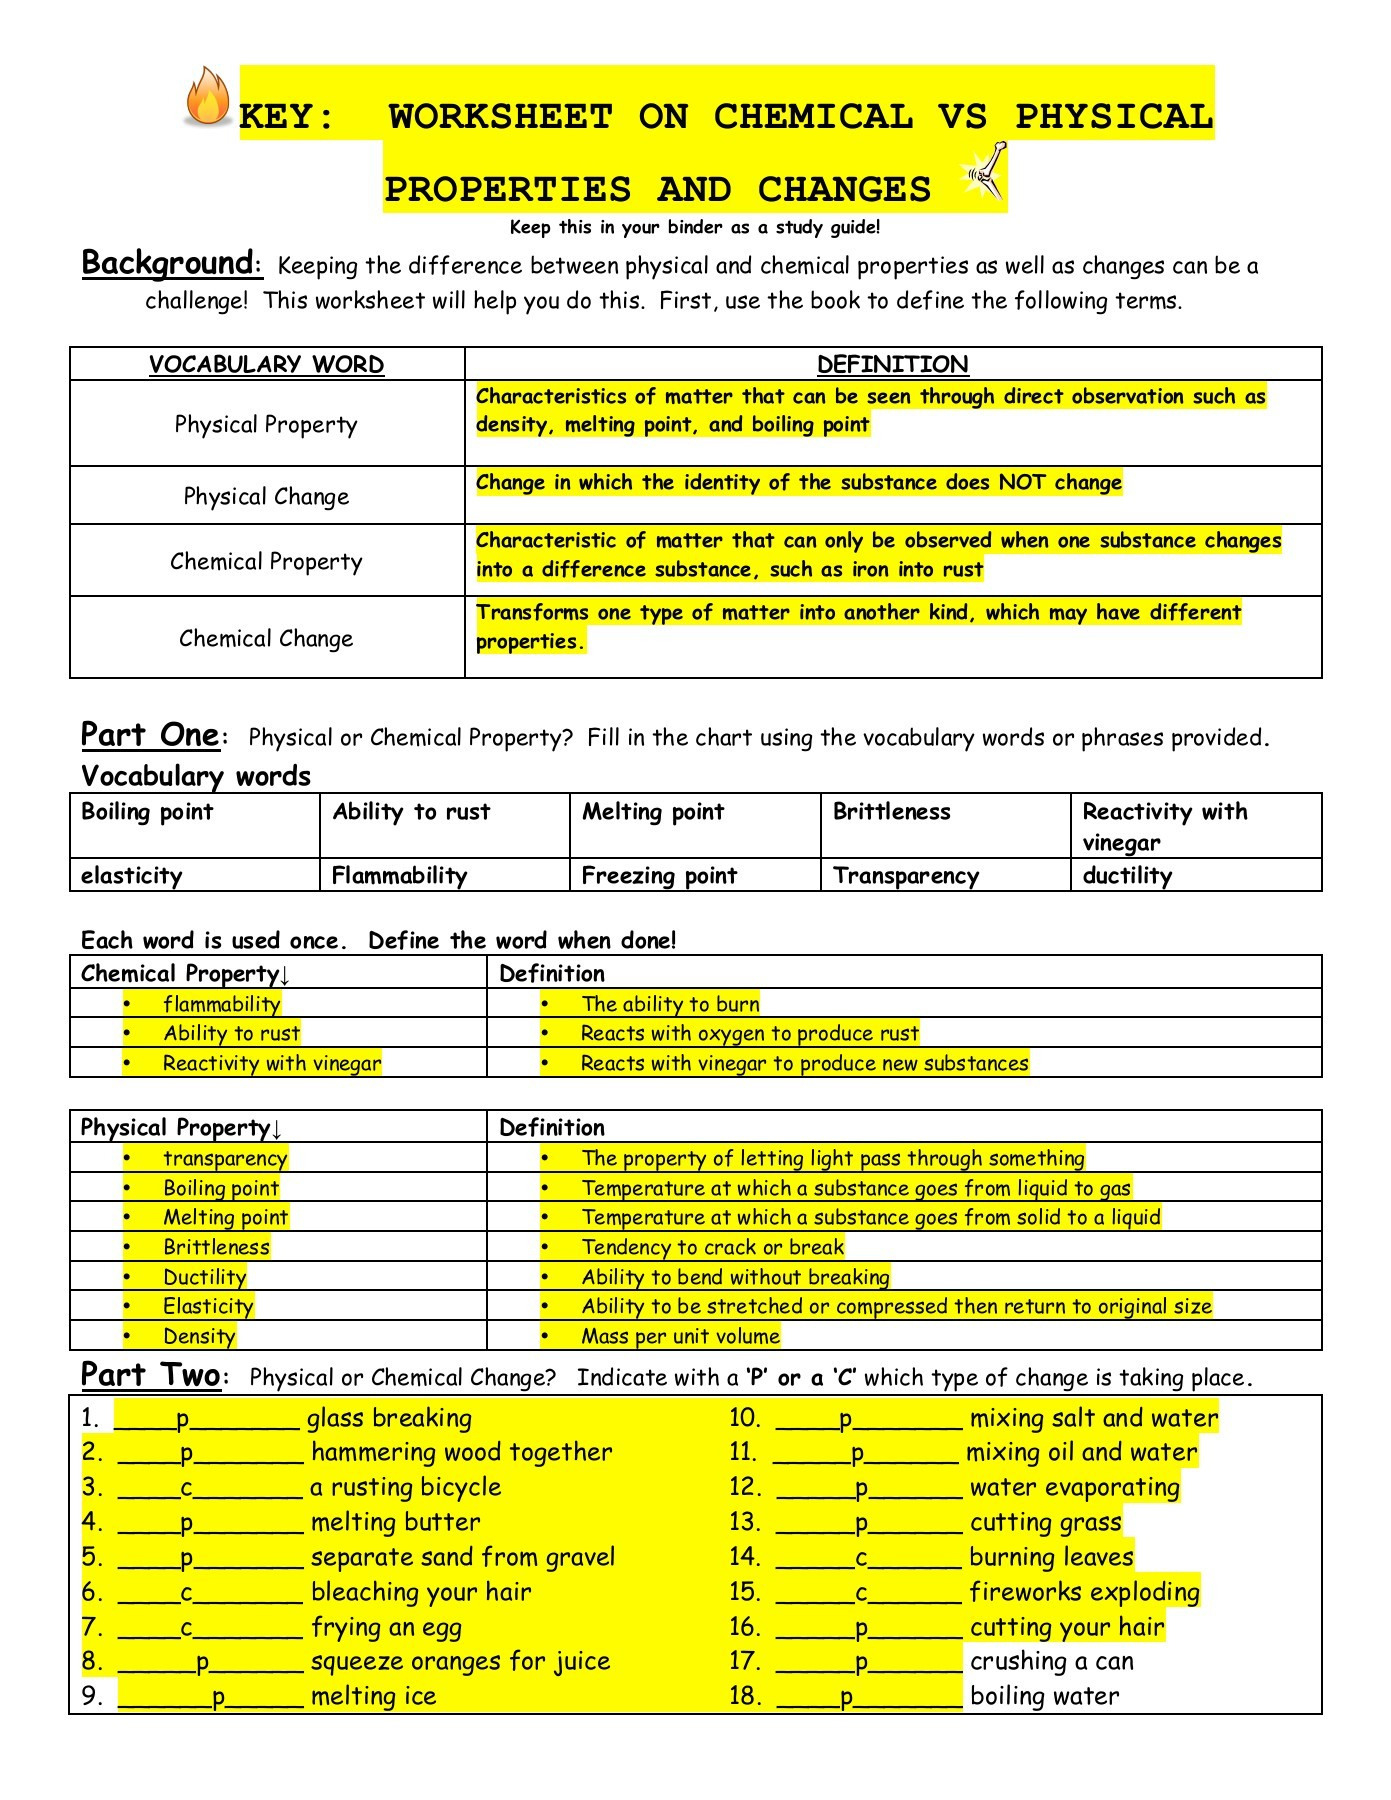 Physical And Chemical Changes And Properties Of Matter Worksheet Db excel